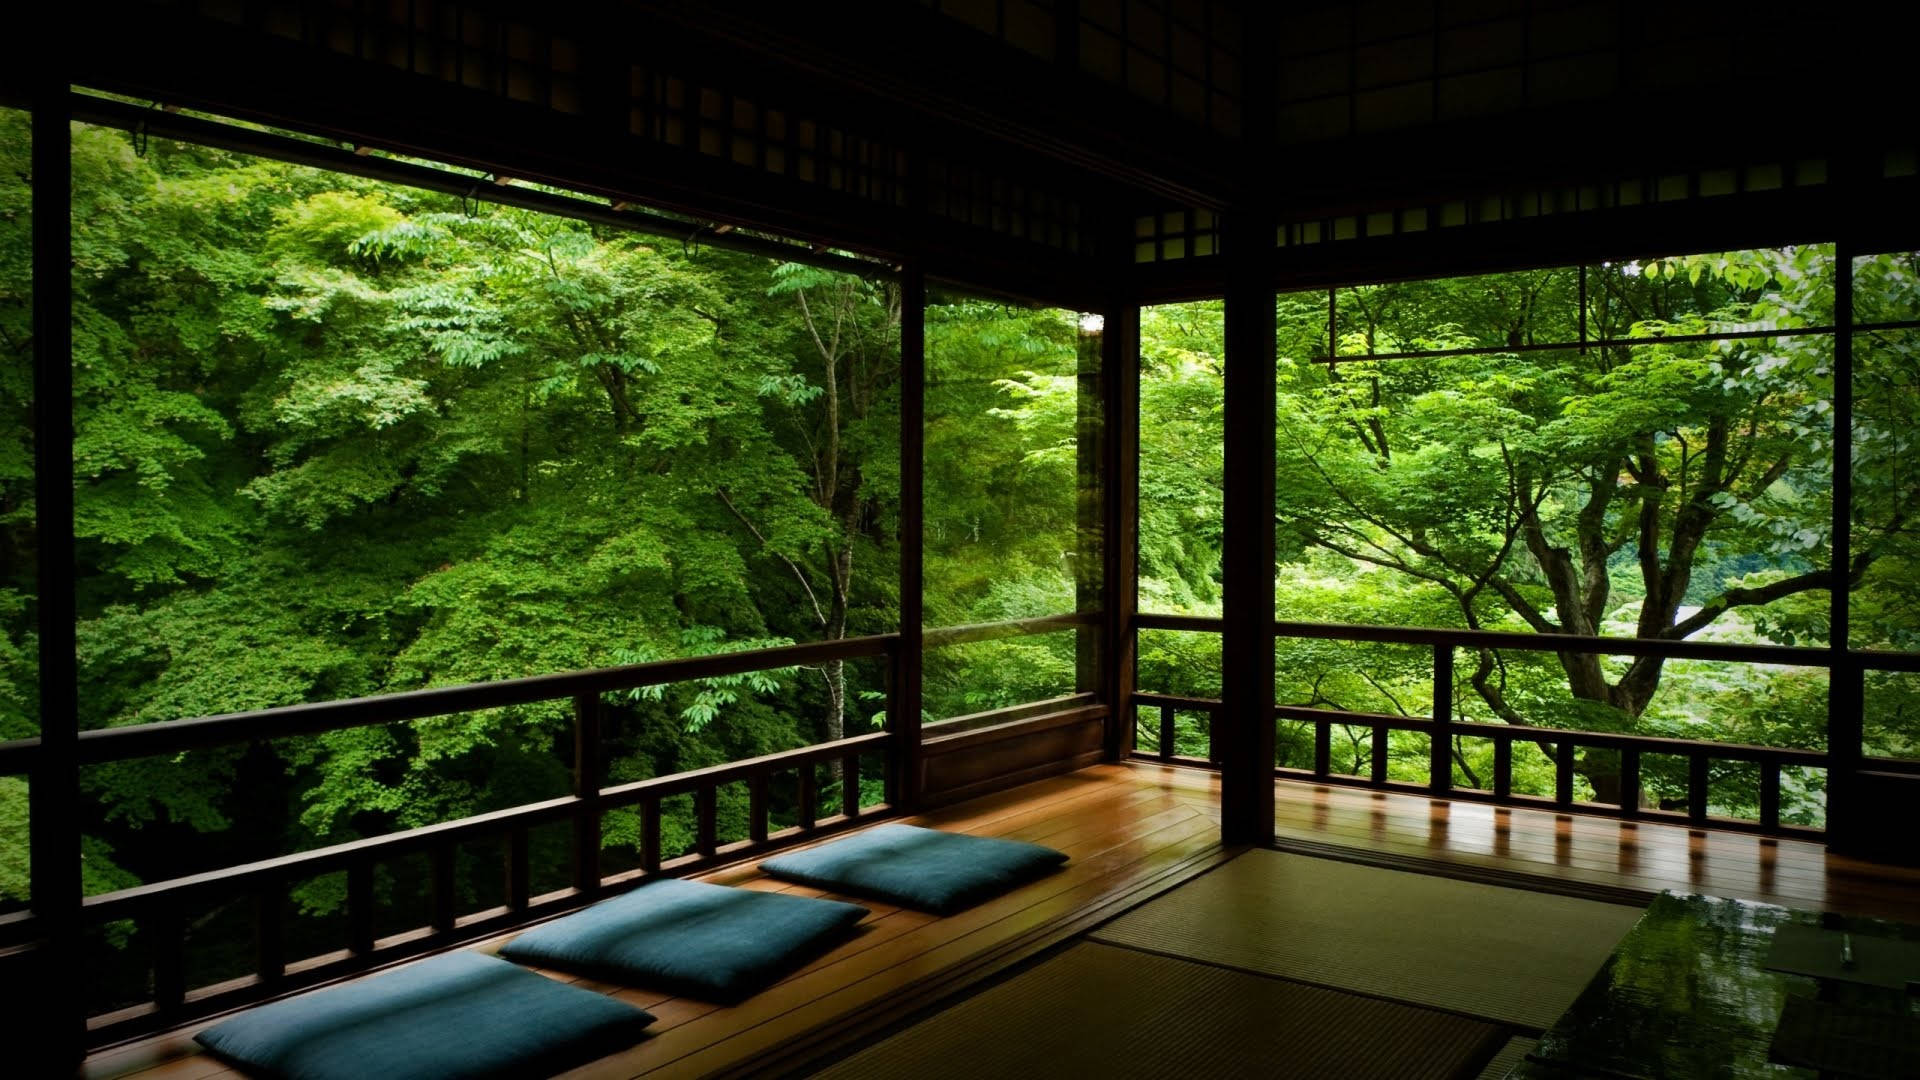 Serenity In Simplicity - The Japanese Tea Room Meditation Haven Background